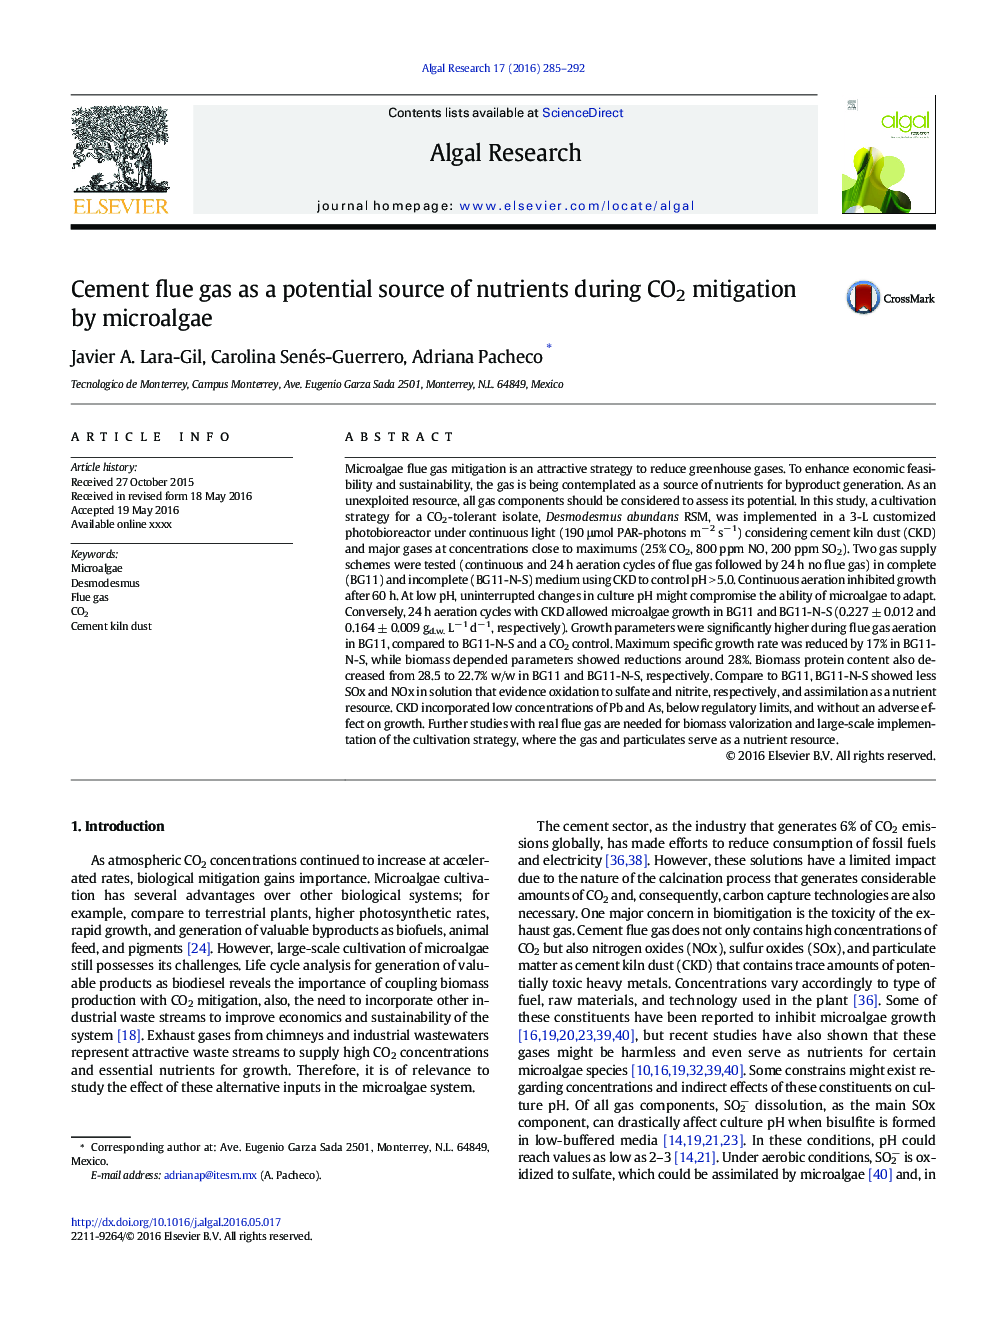 Cement flue gas as a potential source of nutrients during CO2 mitigation by microalgae